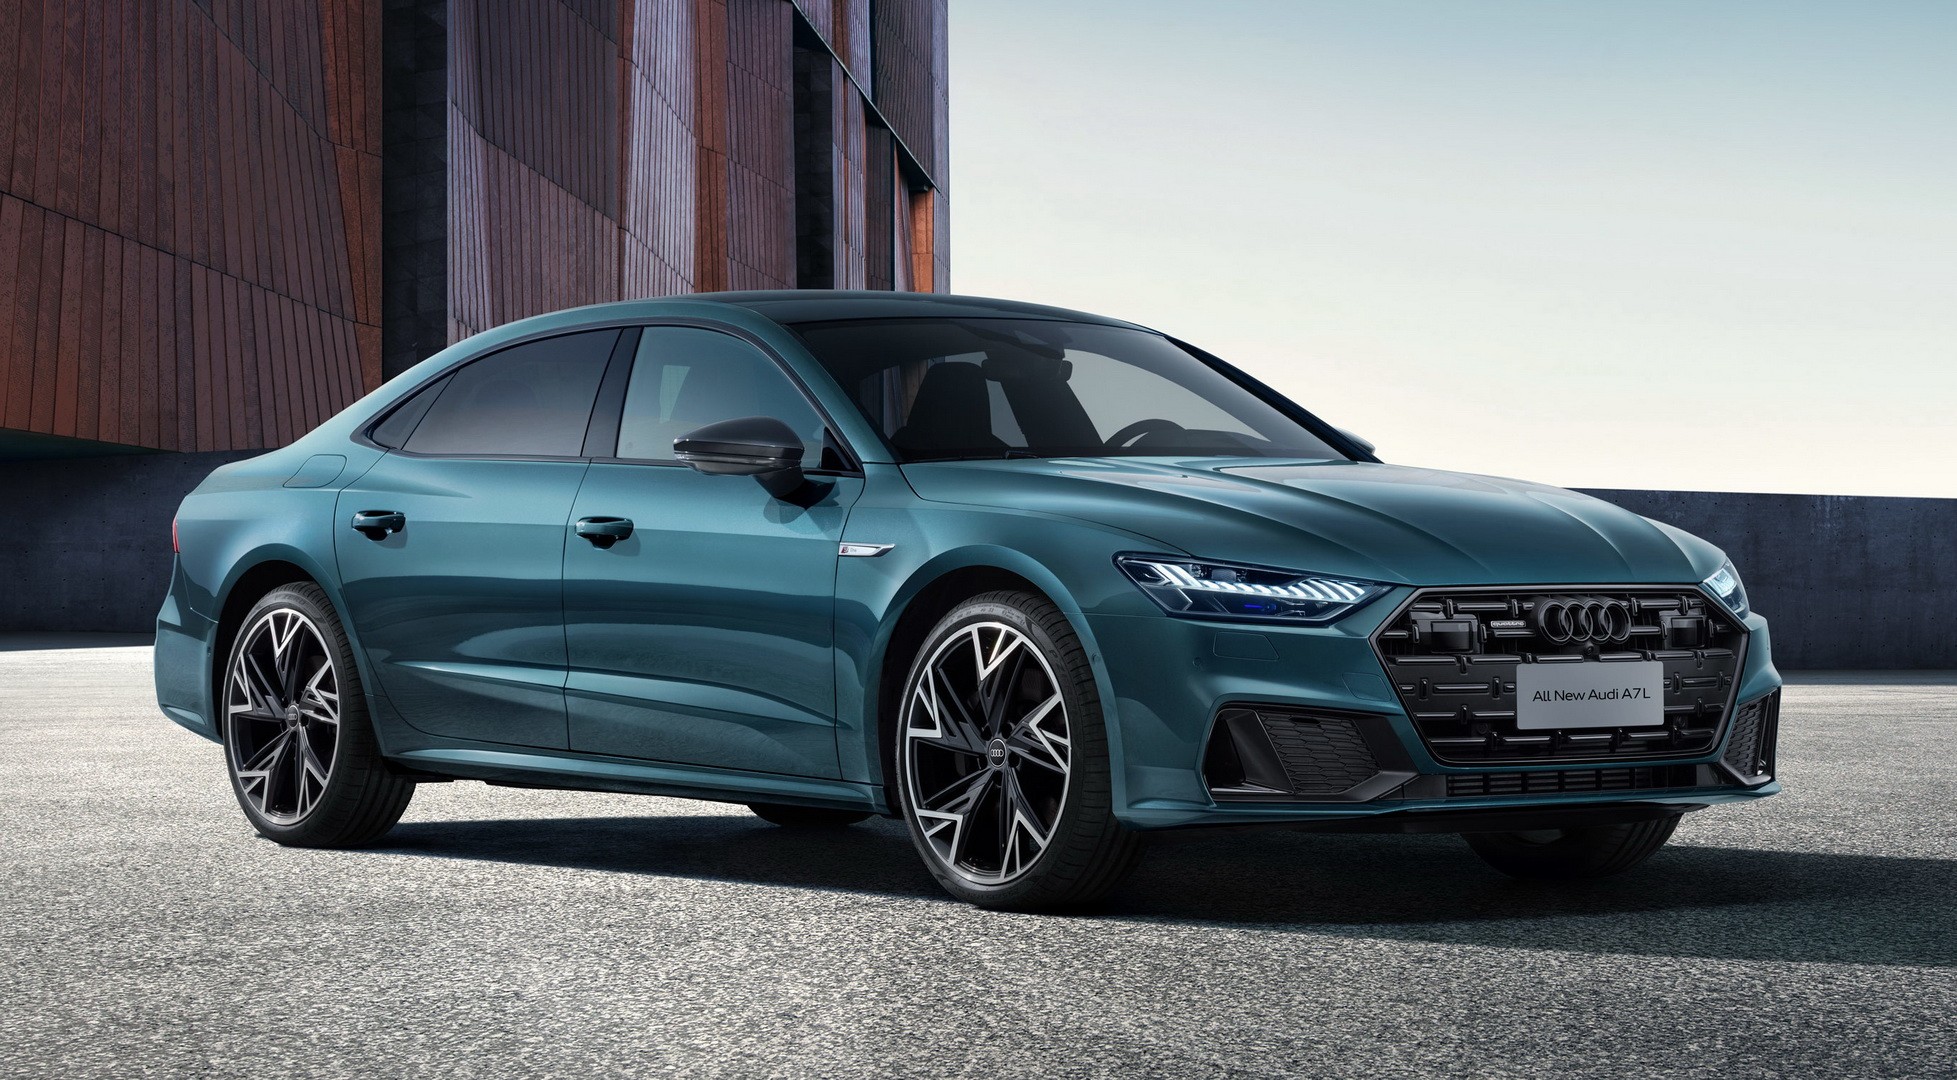 2022 Audi A7 L Now Official With Its Elongated Sedan Body and Generous